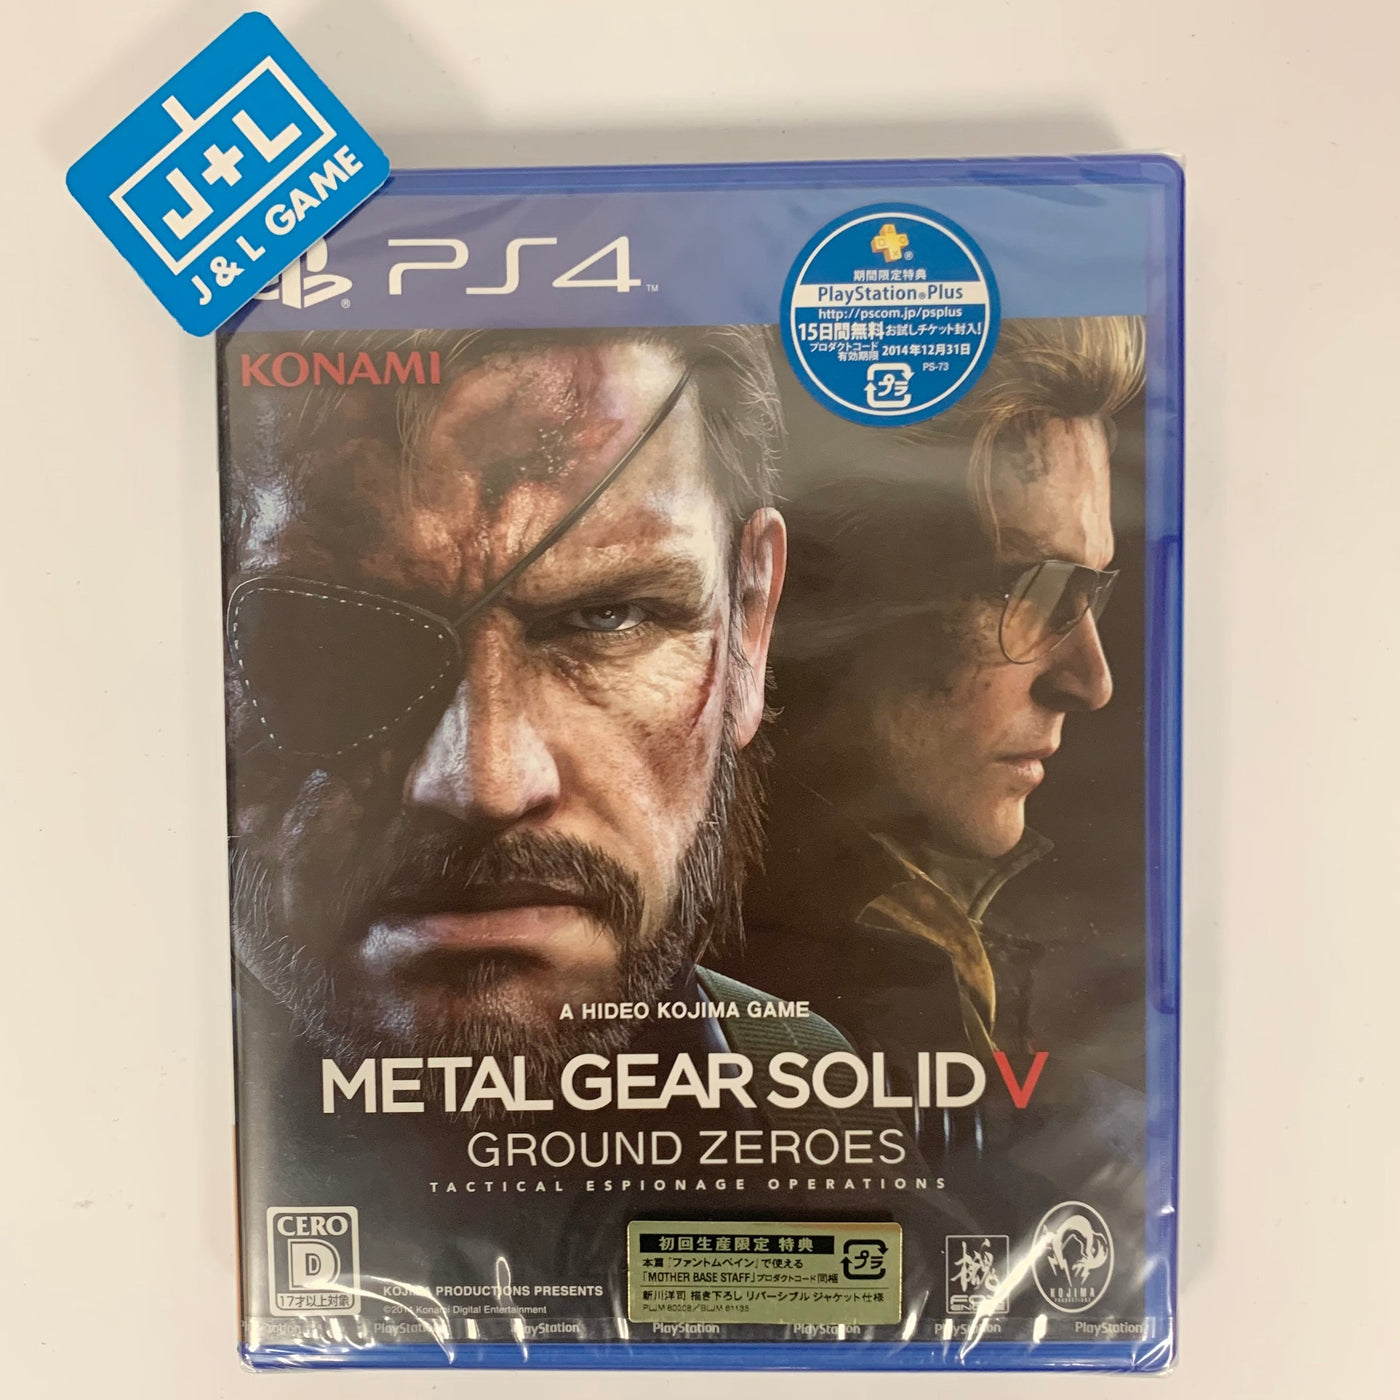 Metal Gear Solid V: Ground Zeroes (Premium Package) - (PS4